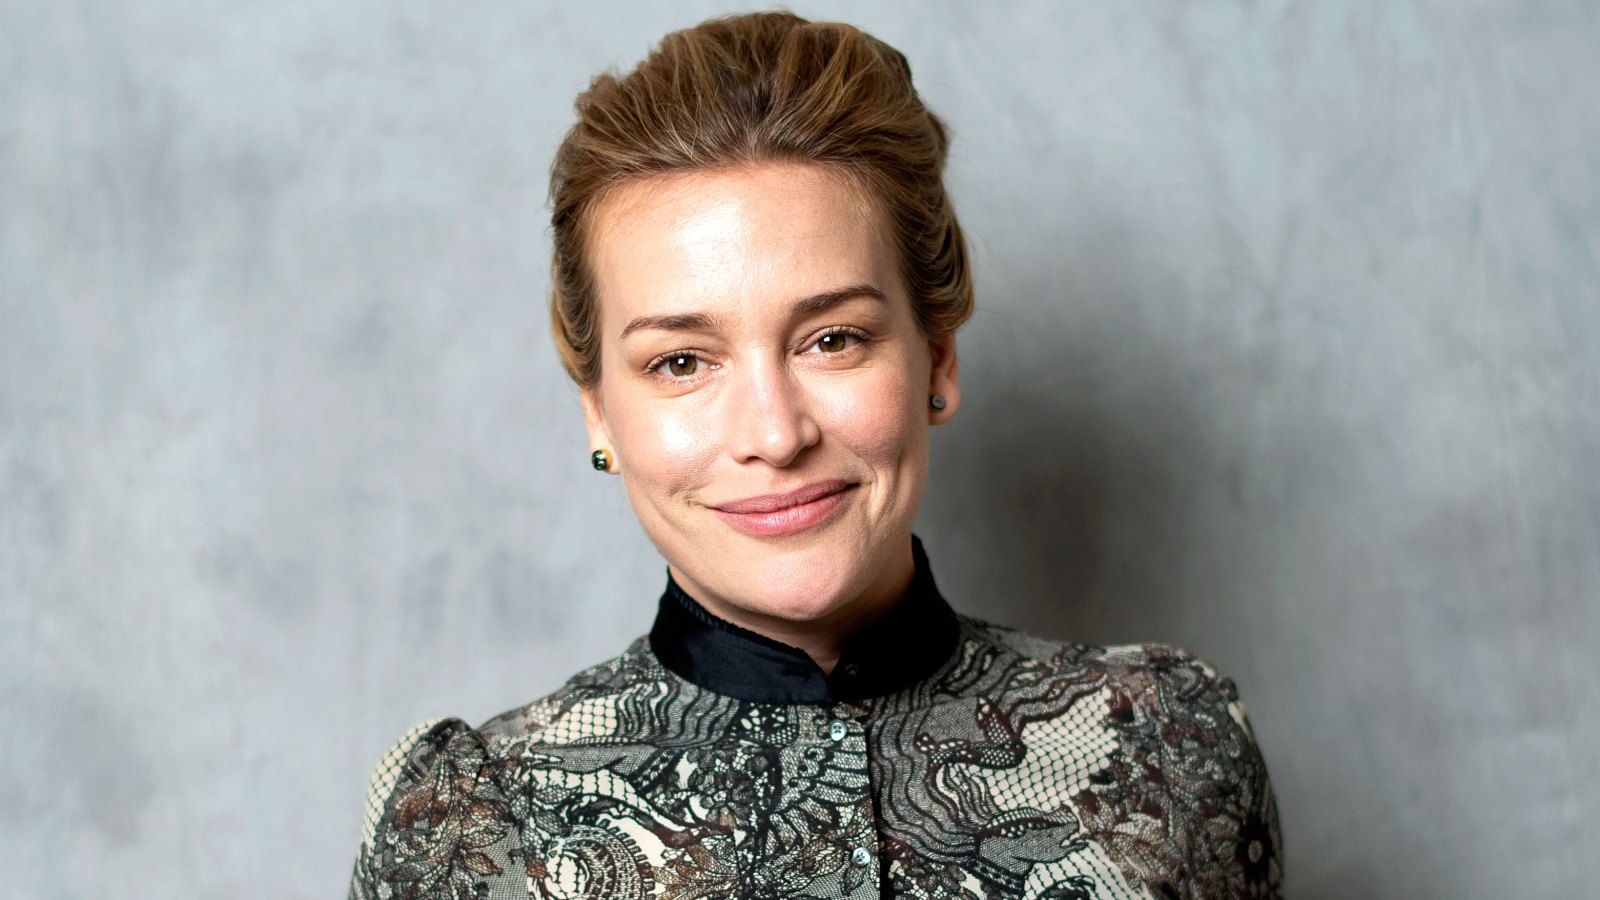 Piper Perabo Doesn’t Have Plans For Children After She ‘Hit the Jackpot’ With Her Stepdaughter